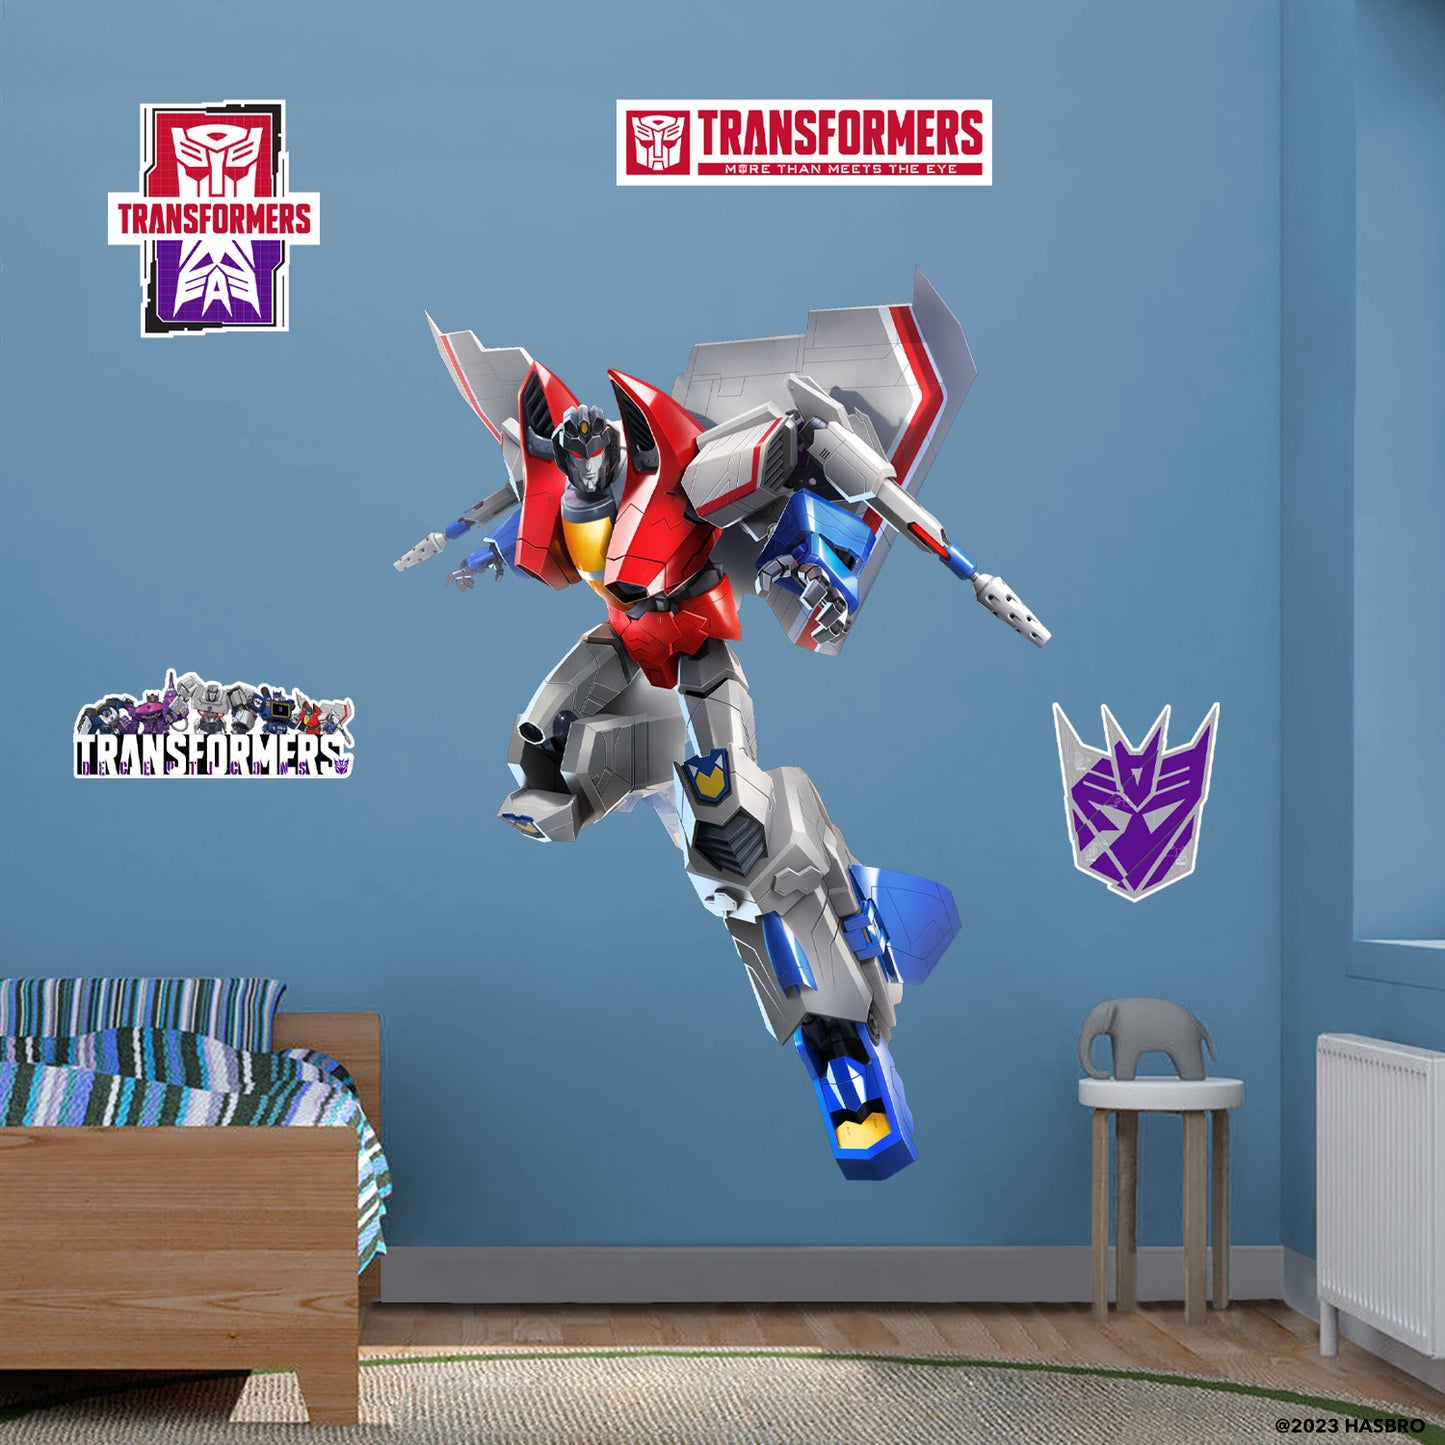 Transformers: Starscream RealBig - Officially Licensed Hasbro Removable Adhesive Decal